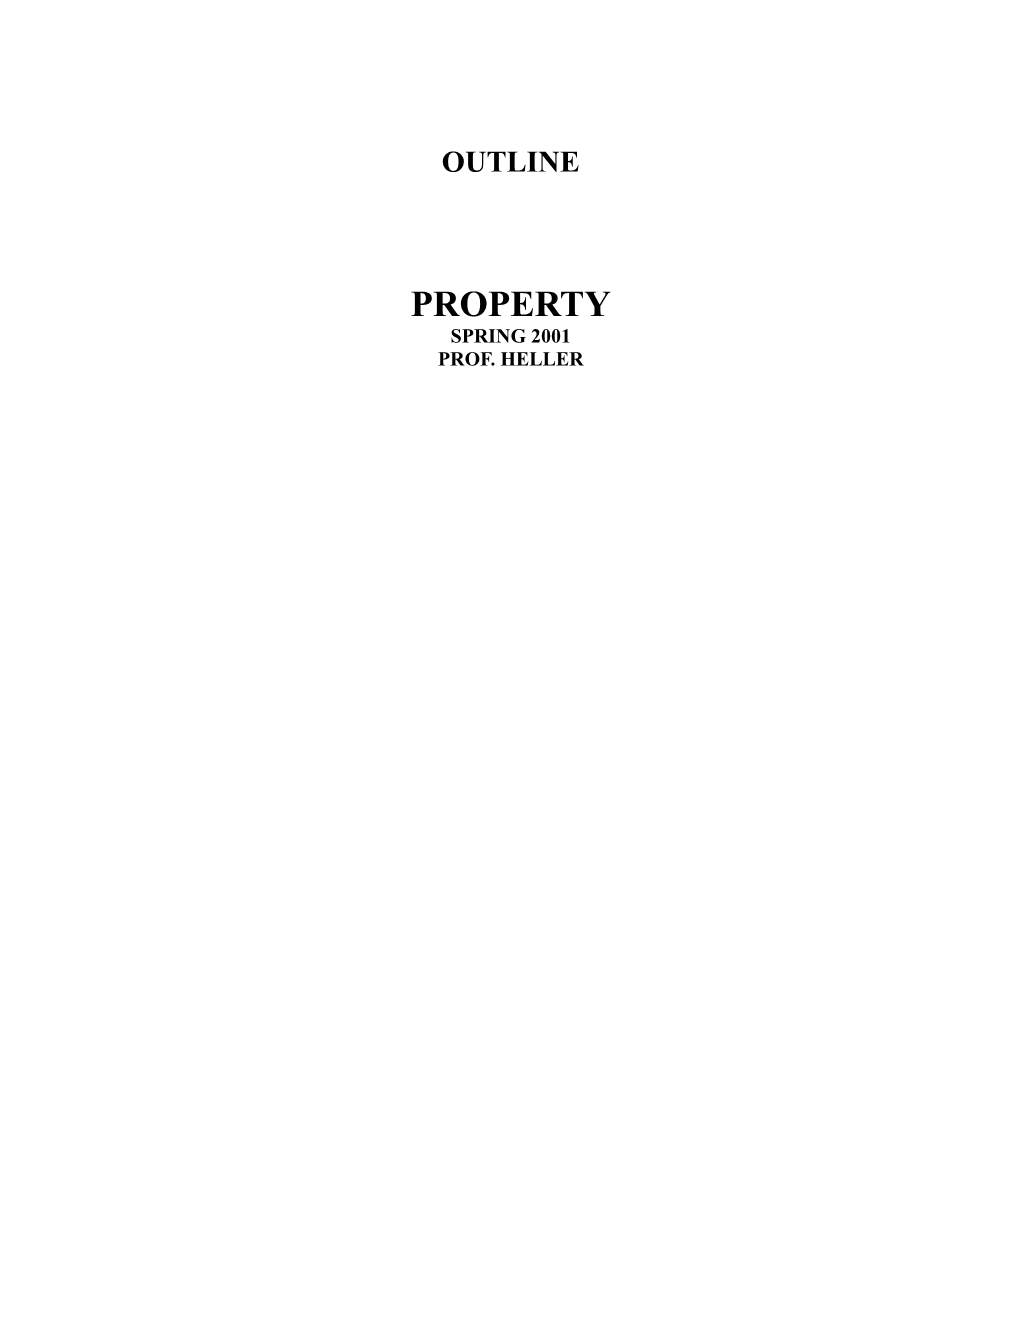 Acquisition of Property and First in Time Principle